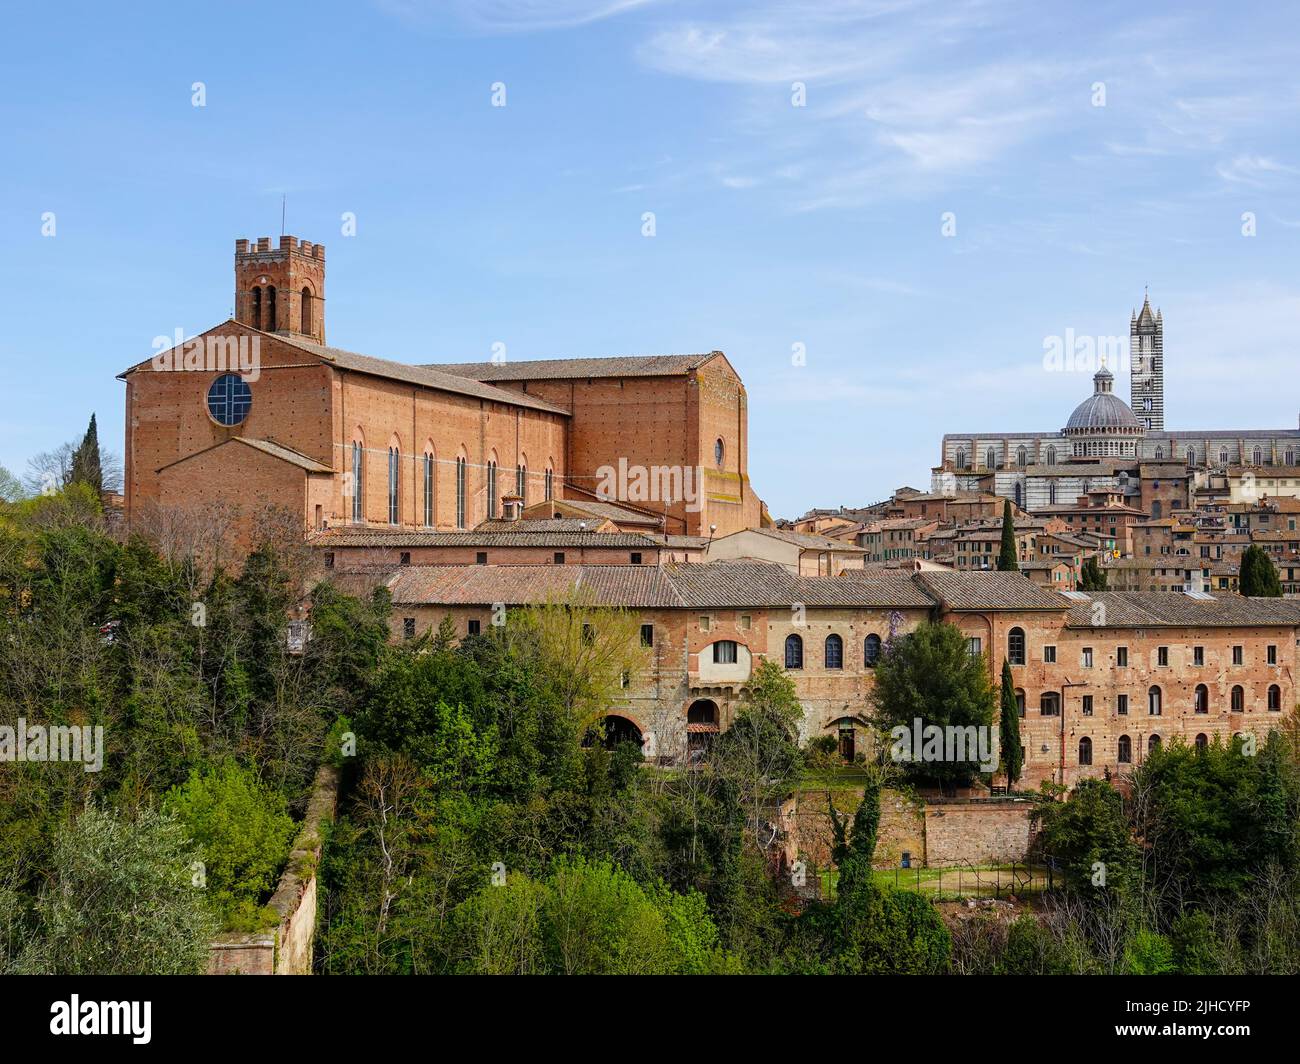 Brick buildings of Siena as seen from a distance, Tuscany, Italy. Stock Photo